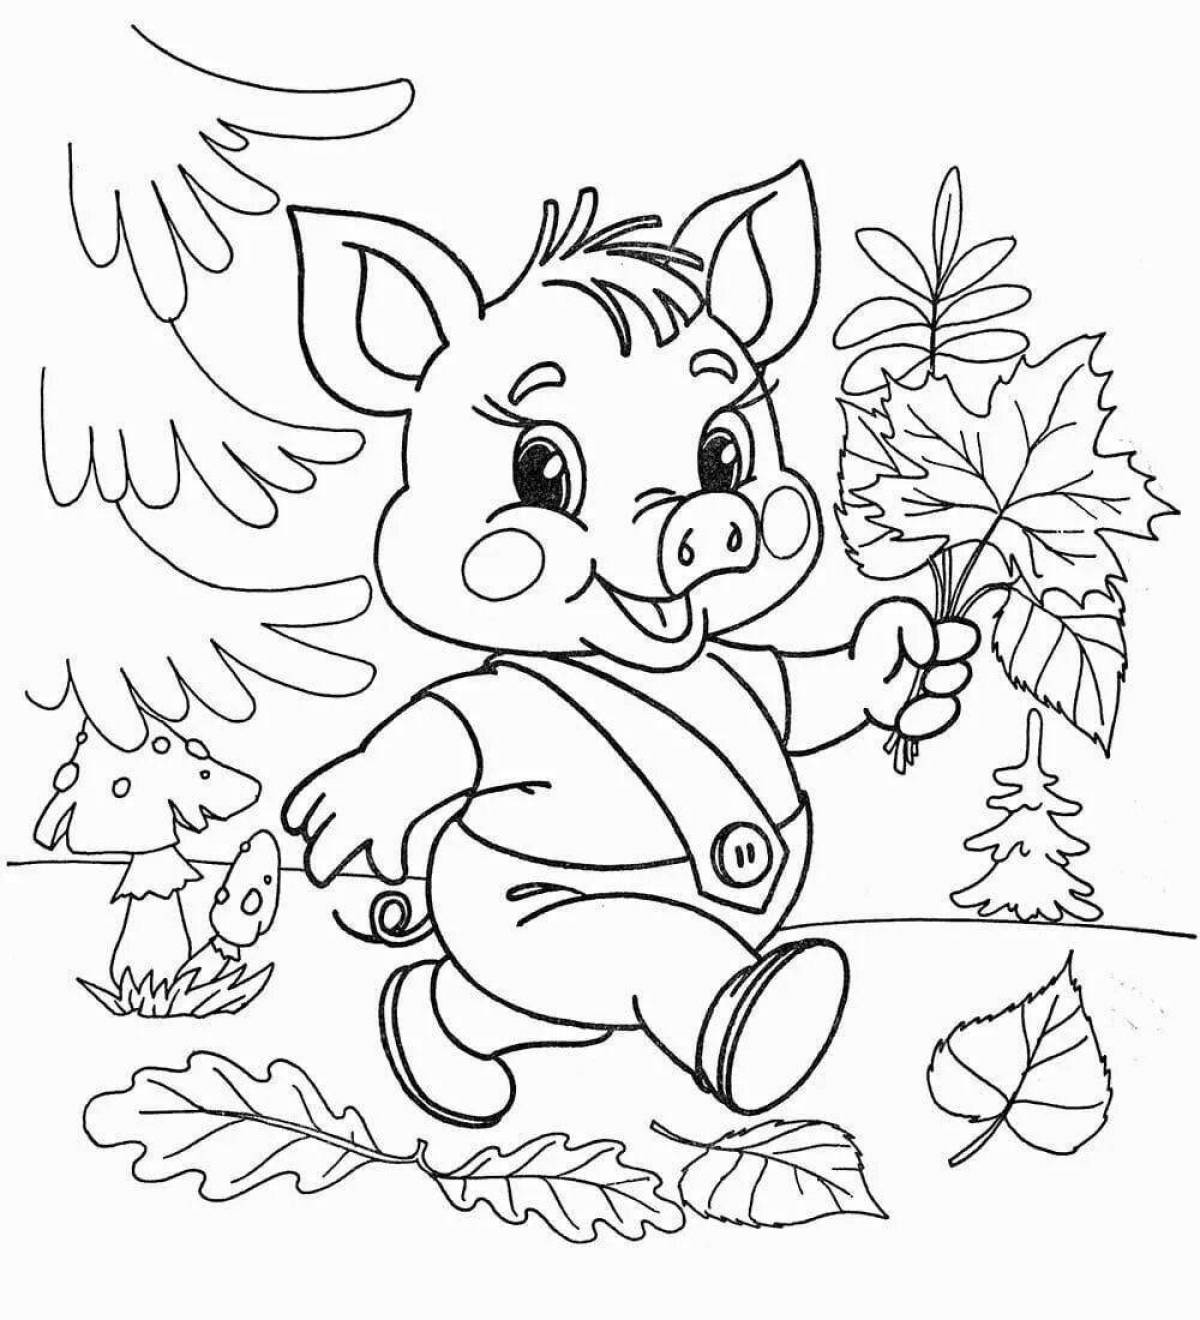 Printable coloring pages for kids color-frenzy